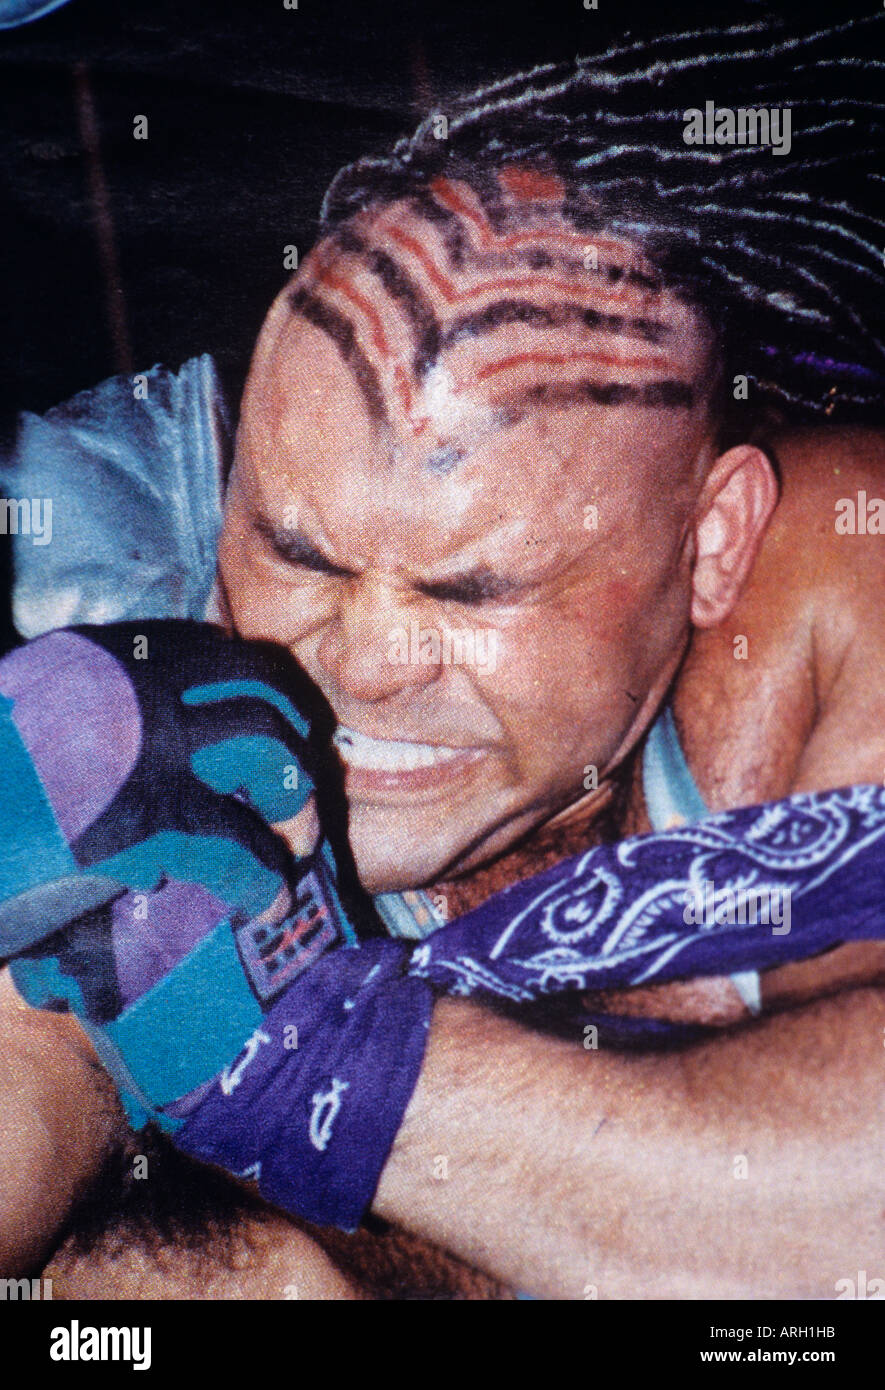 A photograph from a popular Mexican sports magazine of a grisly wrestler with face screwed up as he squashes his opponent in his arms Stock Photo